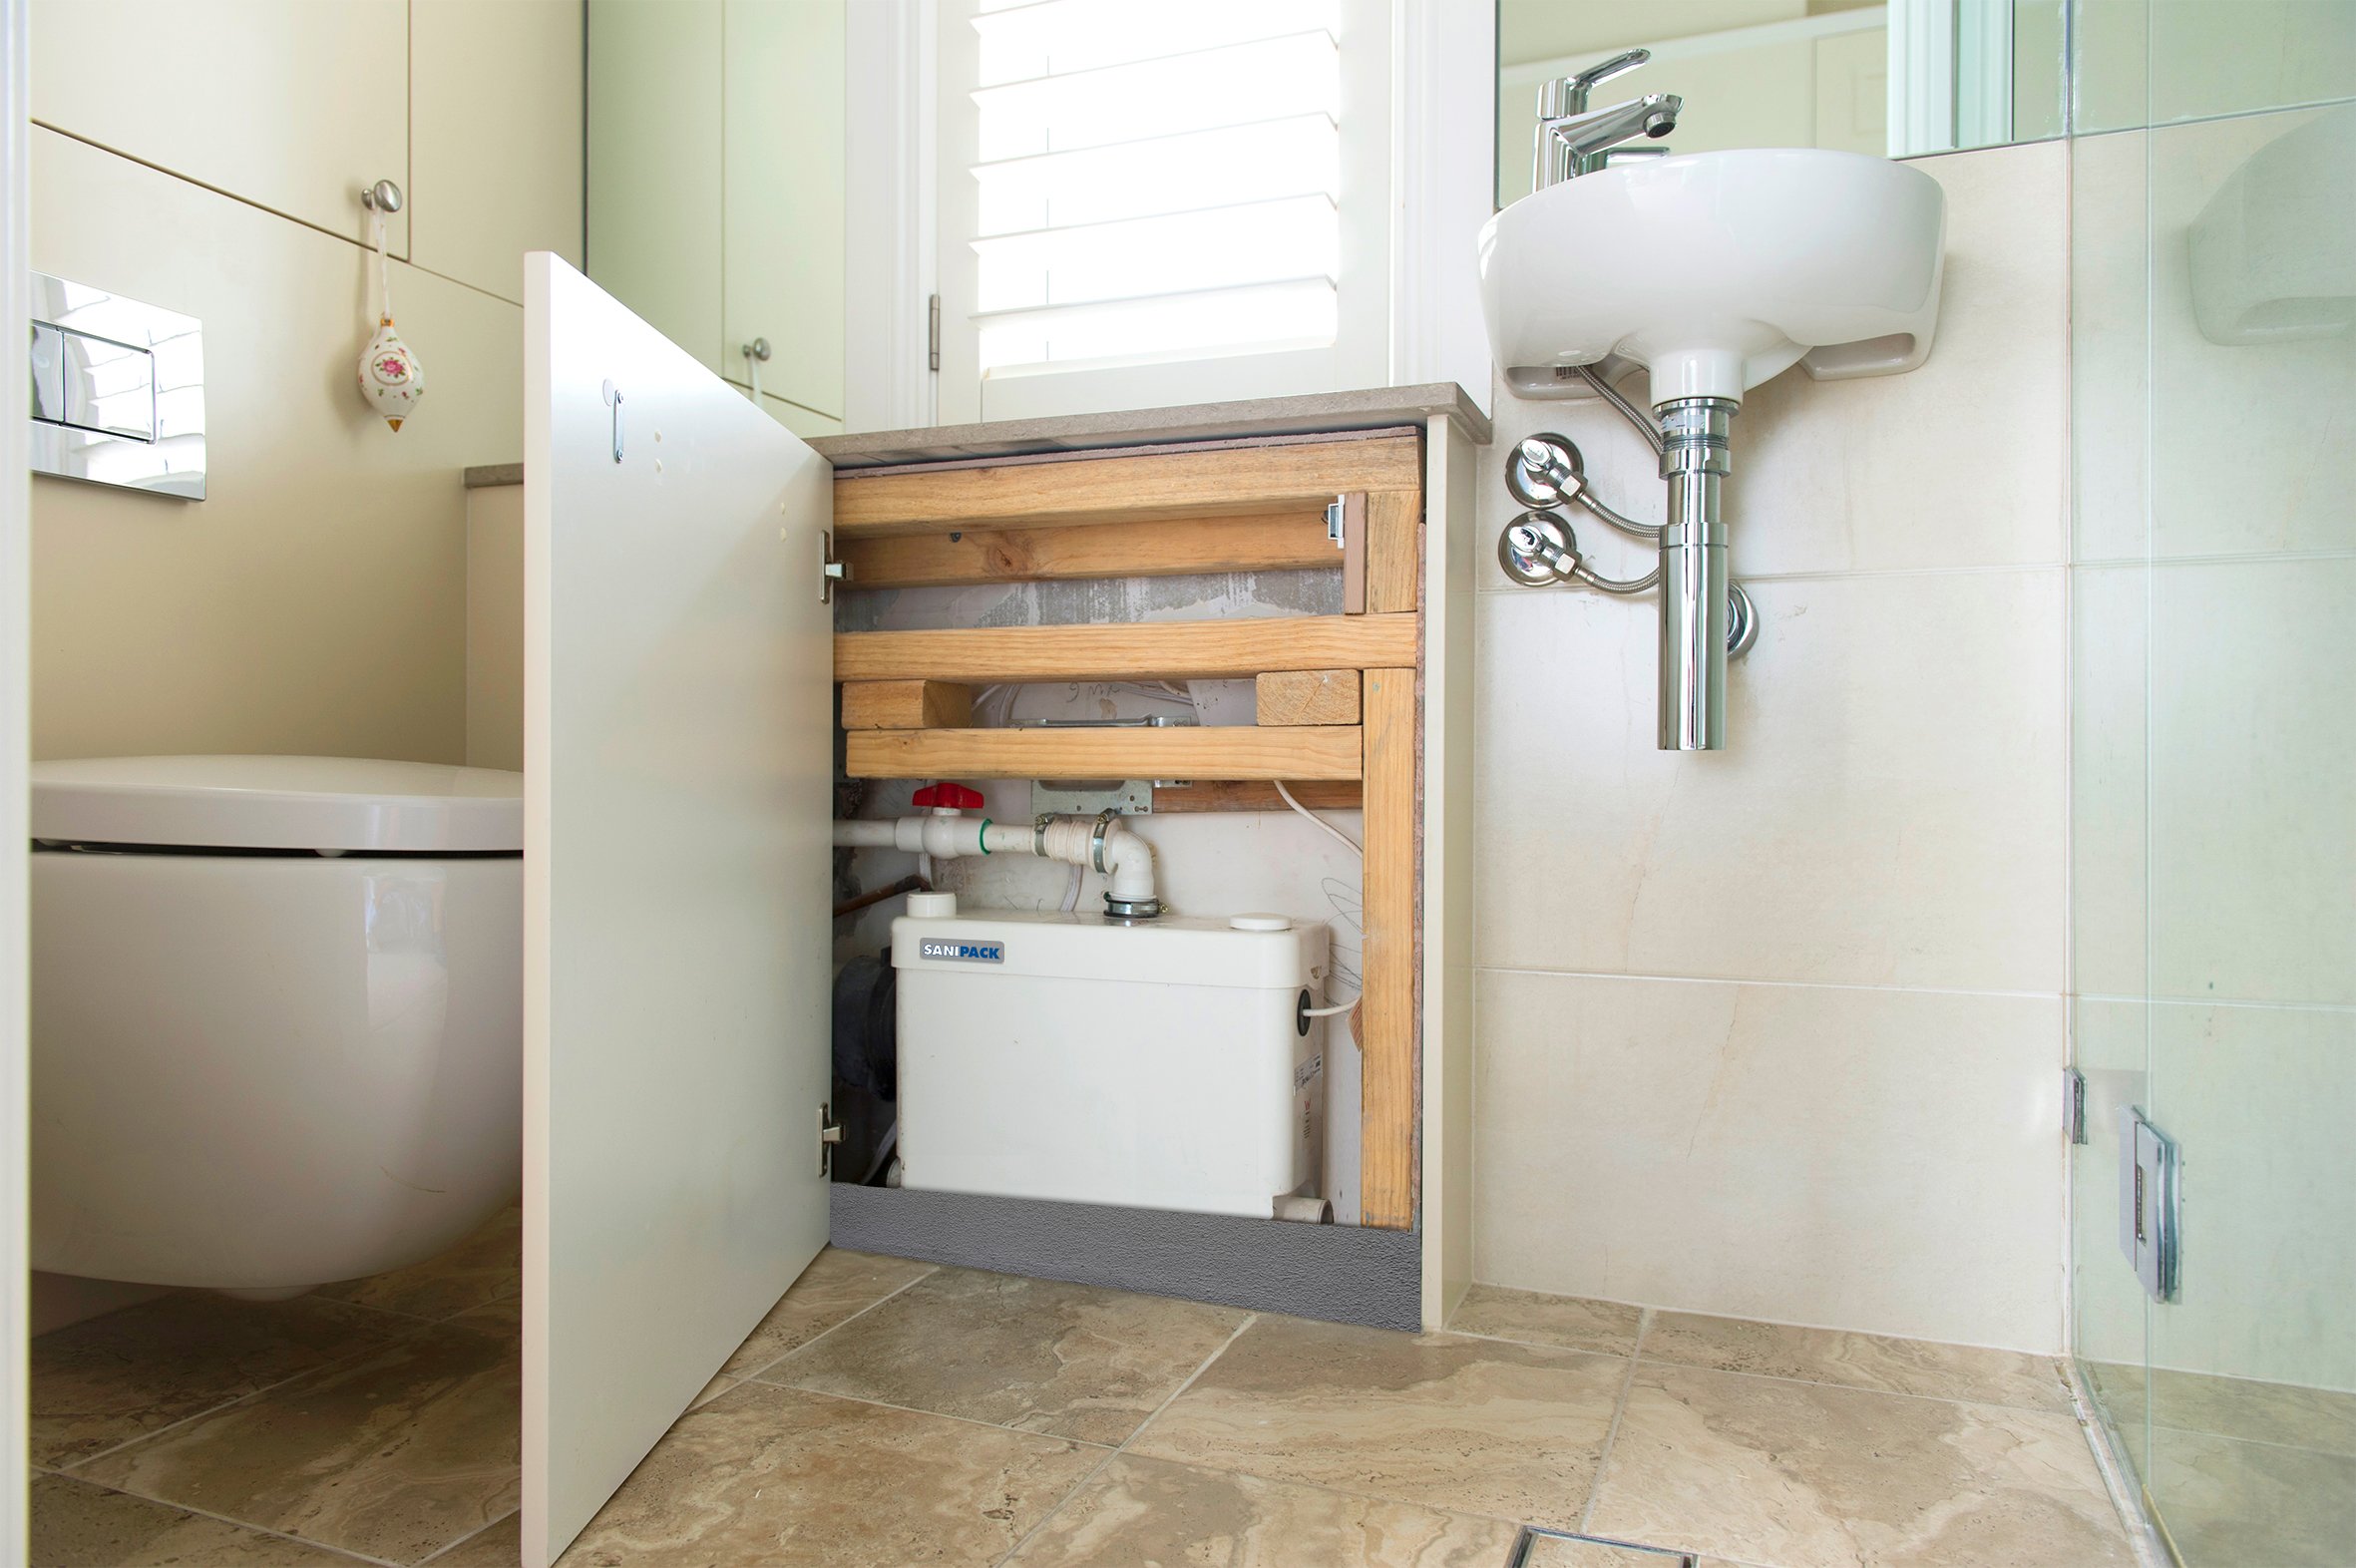 The Sanipack was used to install an ensuite oﬀ the main bedroom and a powder room next to the main living area.